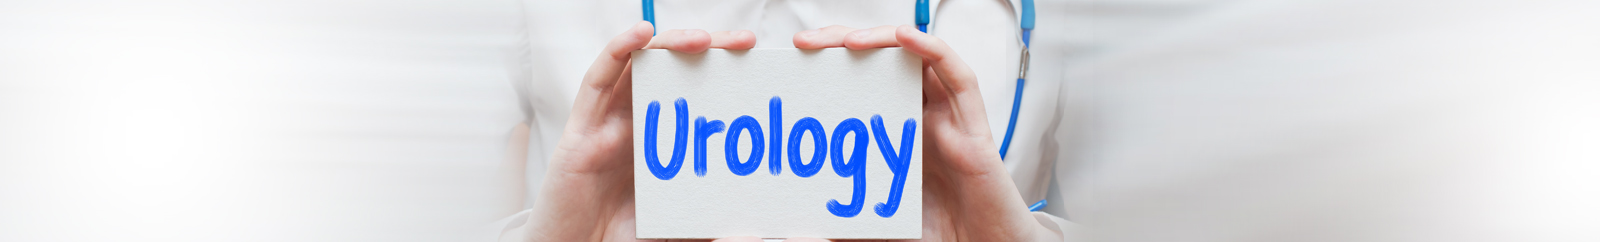 Best Urology Hospital and Treatment in India